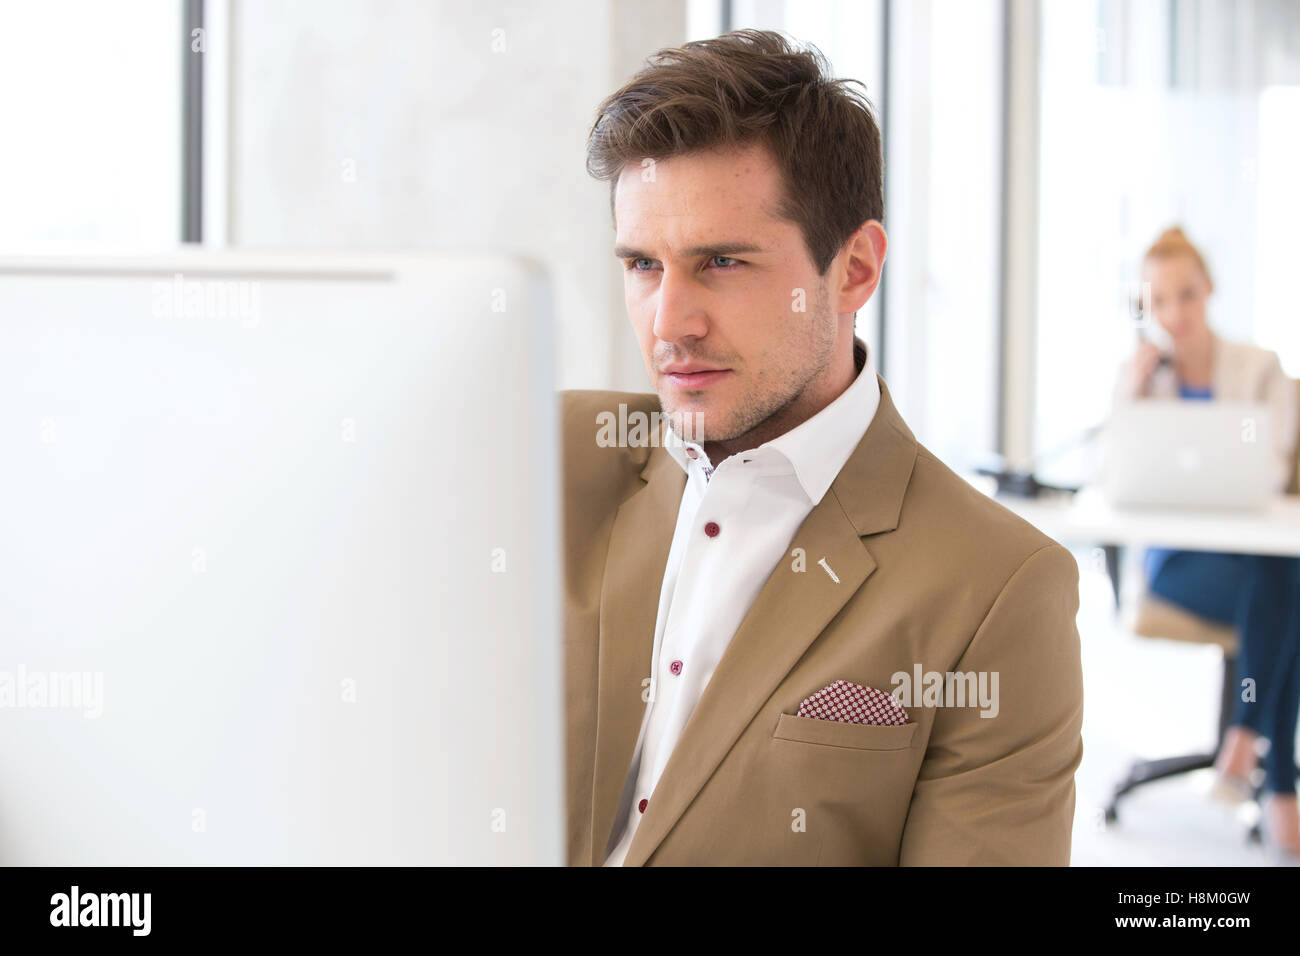 Handsome young businessman using computer in office Banque D'Images